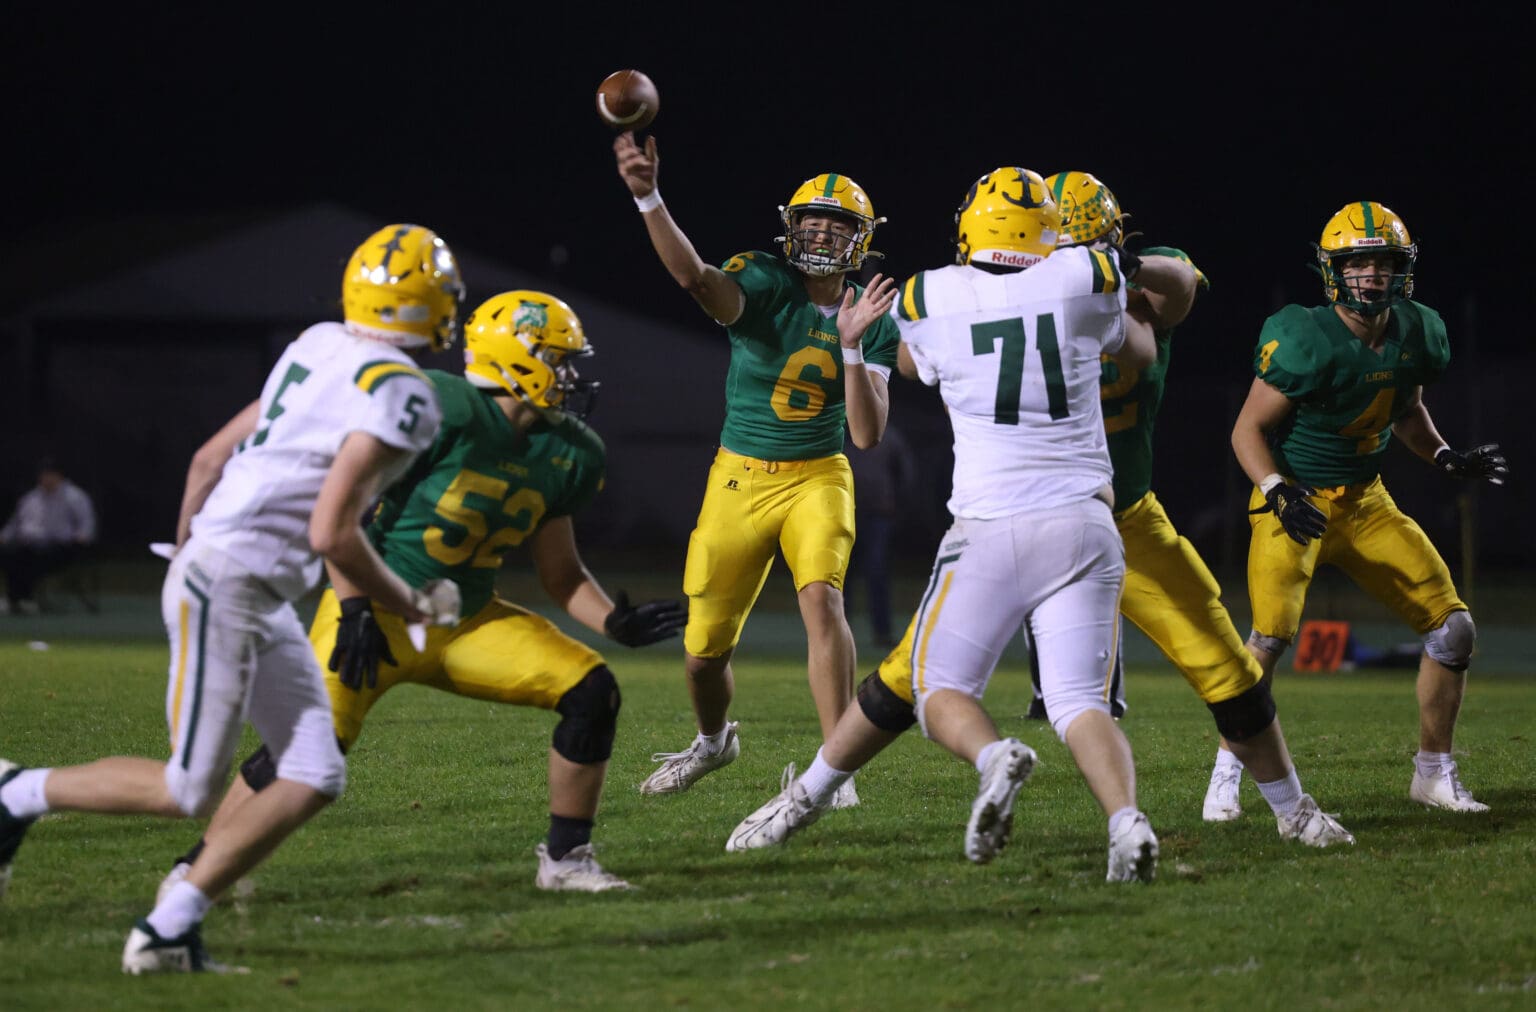 Lynden’s Brant Heppner throws a touchdown pass Sept. 29 during a game against Sehome.